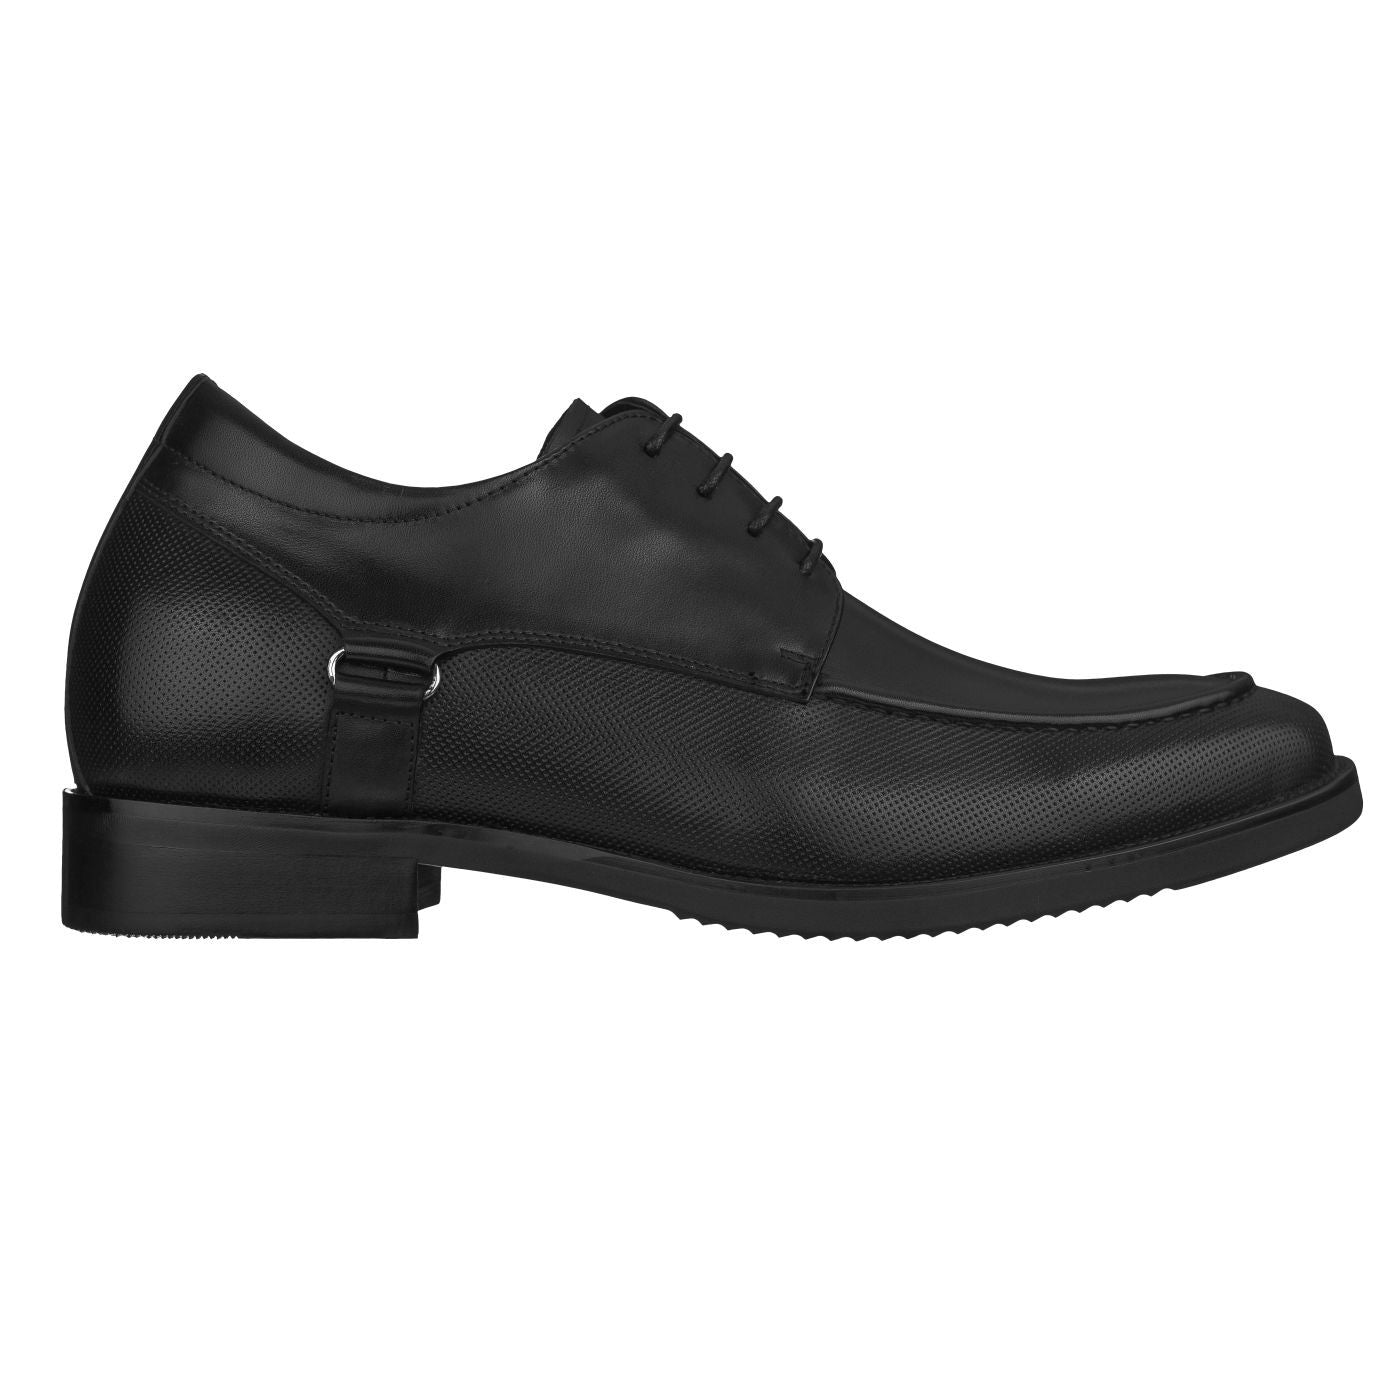 Elevator shoes height increase CALTO - S2003 - 3.0 Inches Taller (Black)